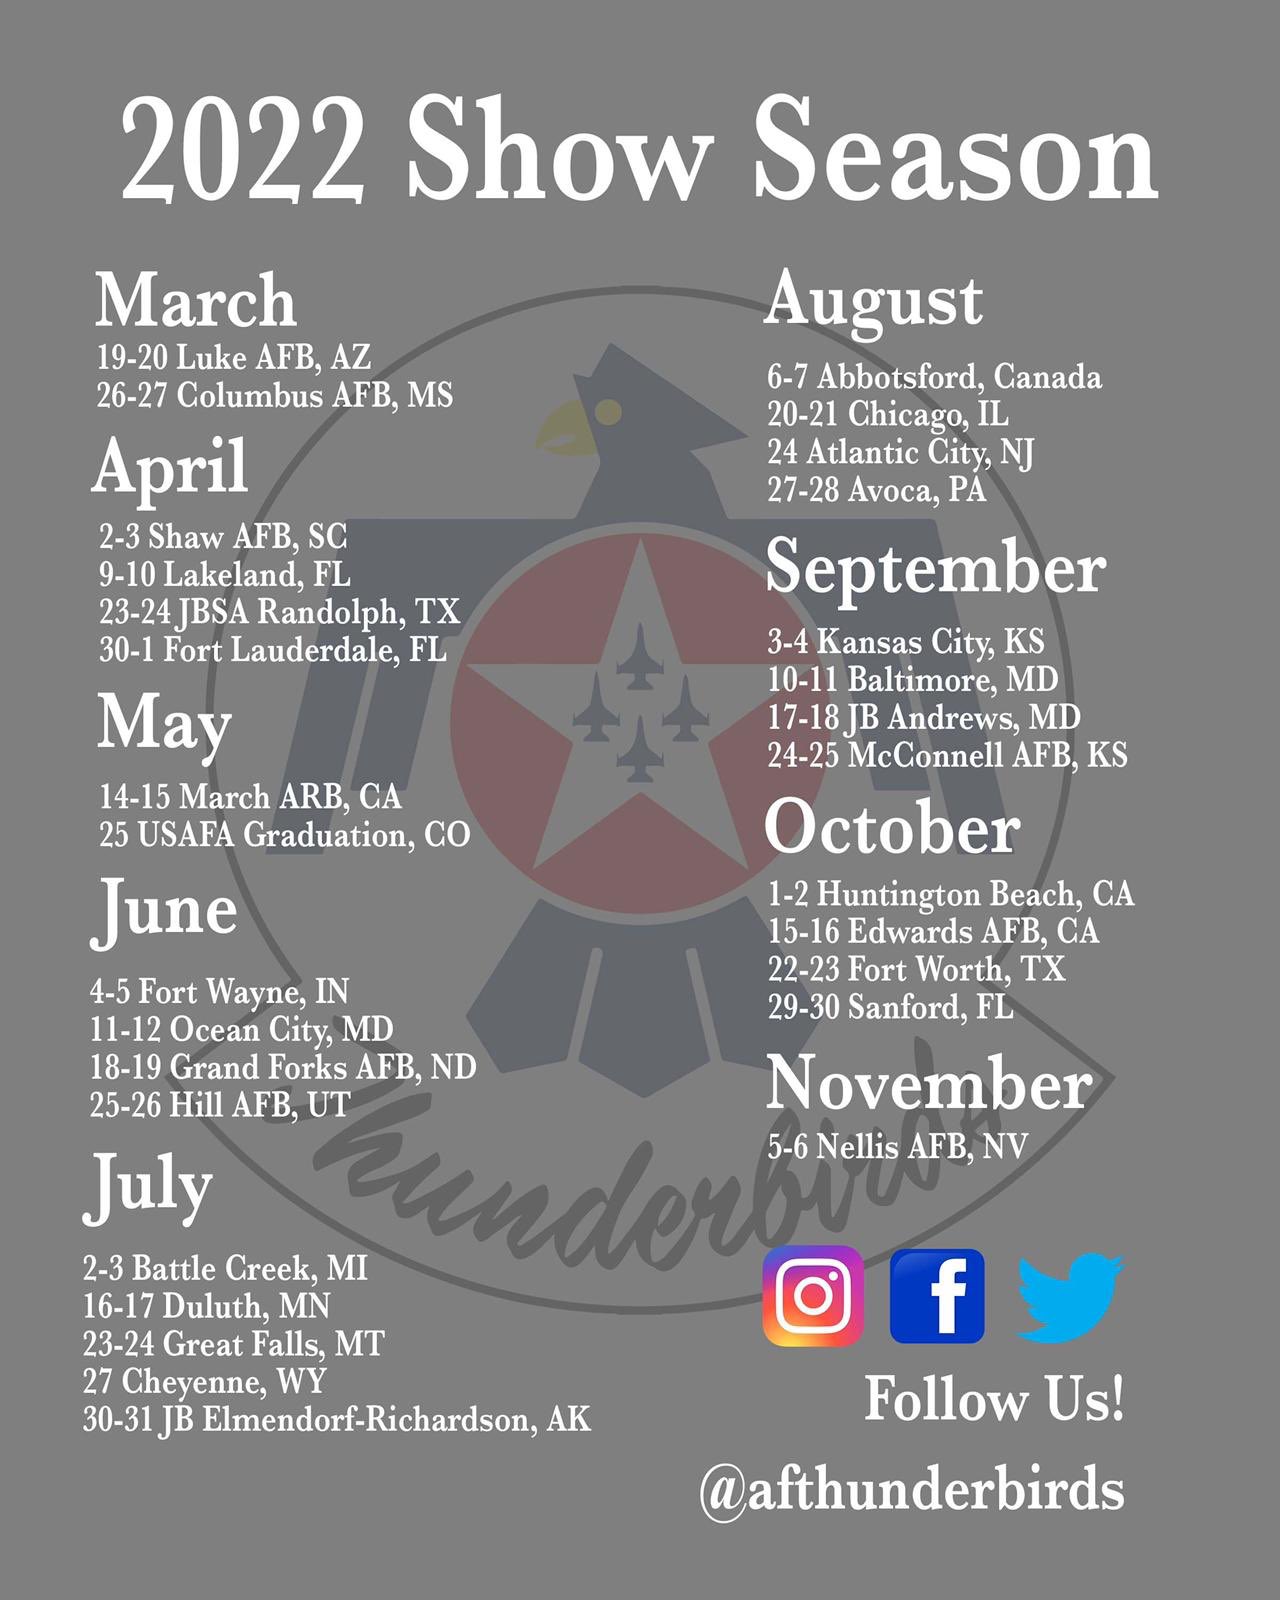 Thunderbirds On Twitter We Re Excited To Announce Our 2022 Show Season Schedule Hope To See You At A Show Near You Soon Https T Co Eumdqfueyf Twitter